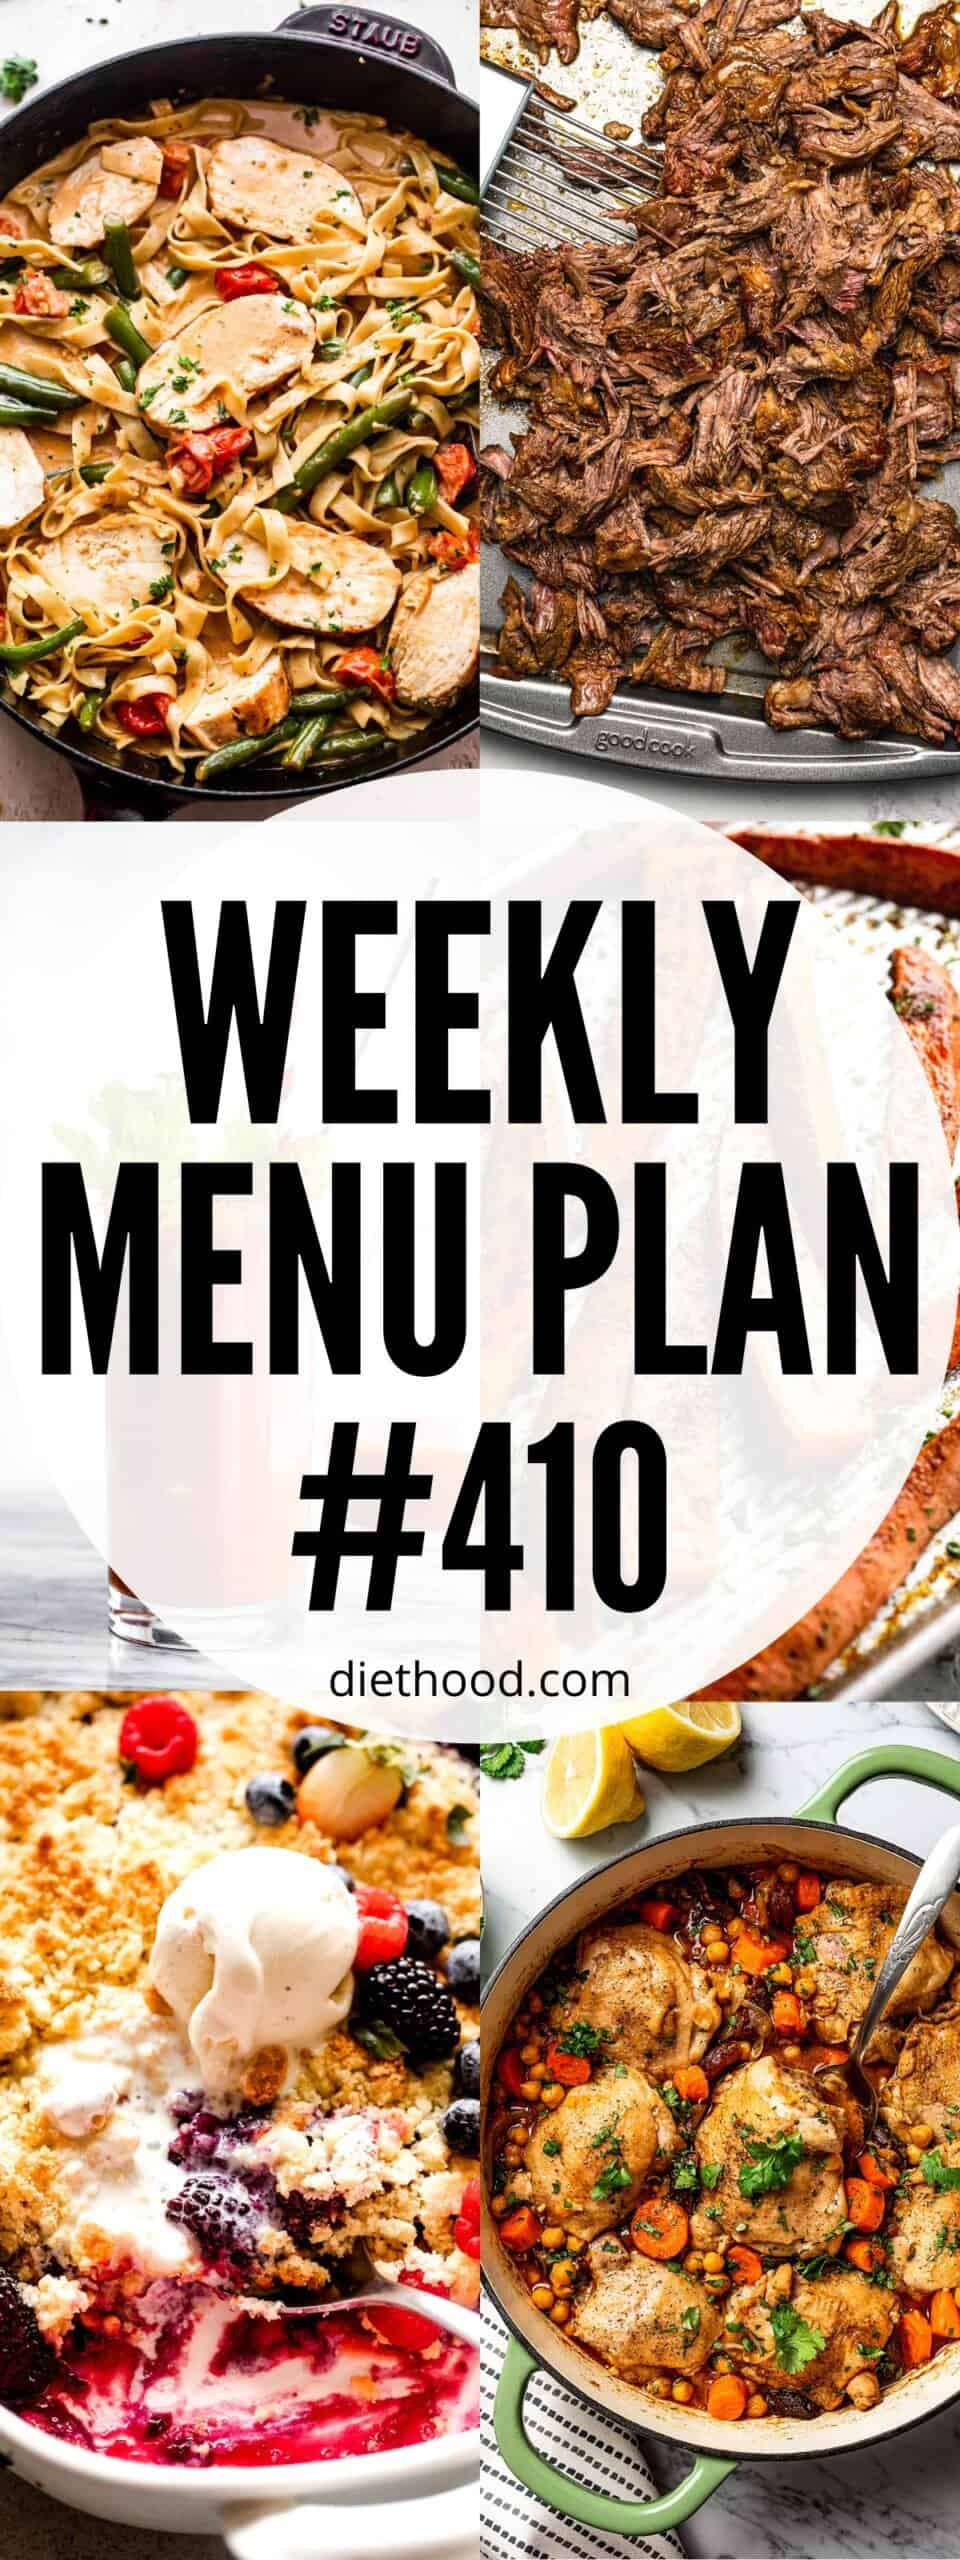 WEEKLY MENU PLAN 410 six pictures collage